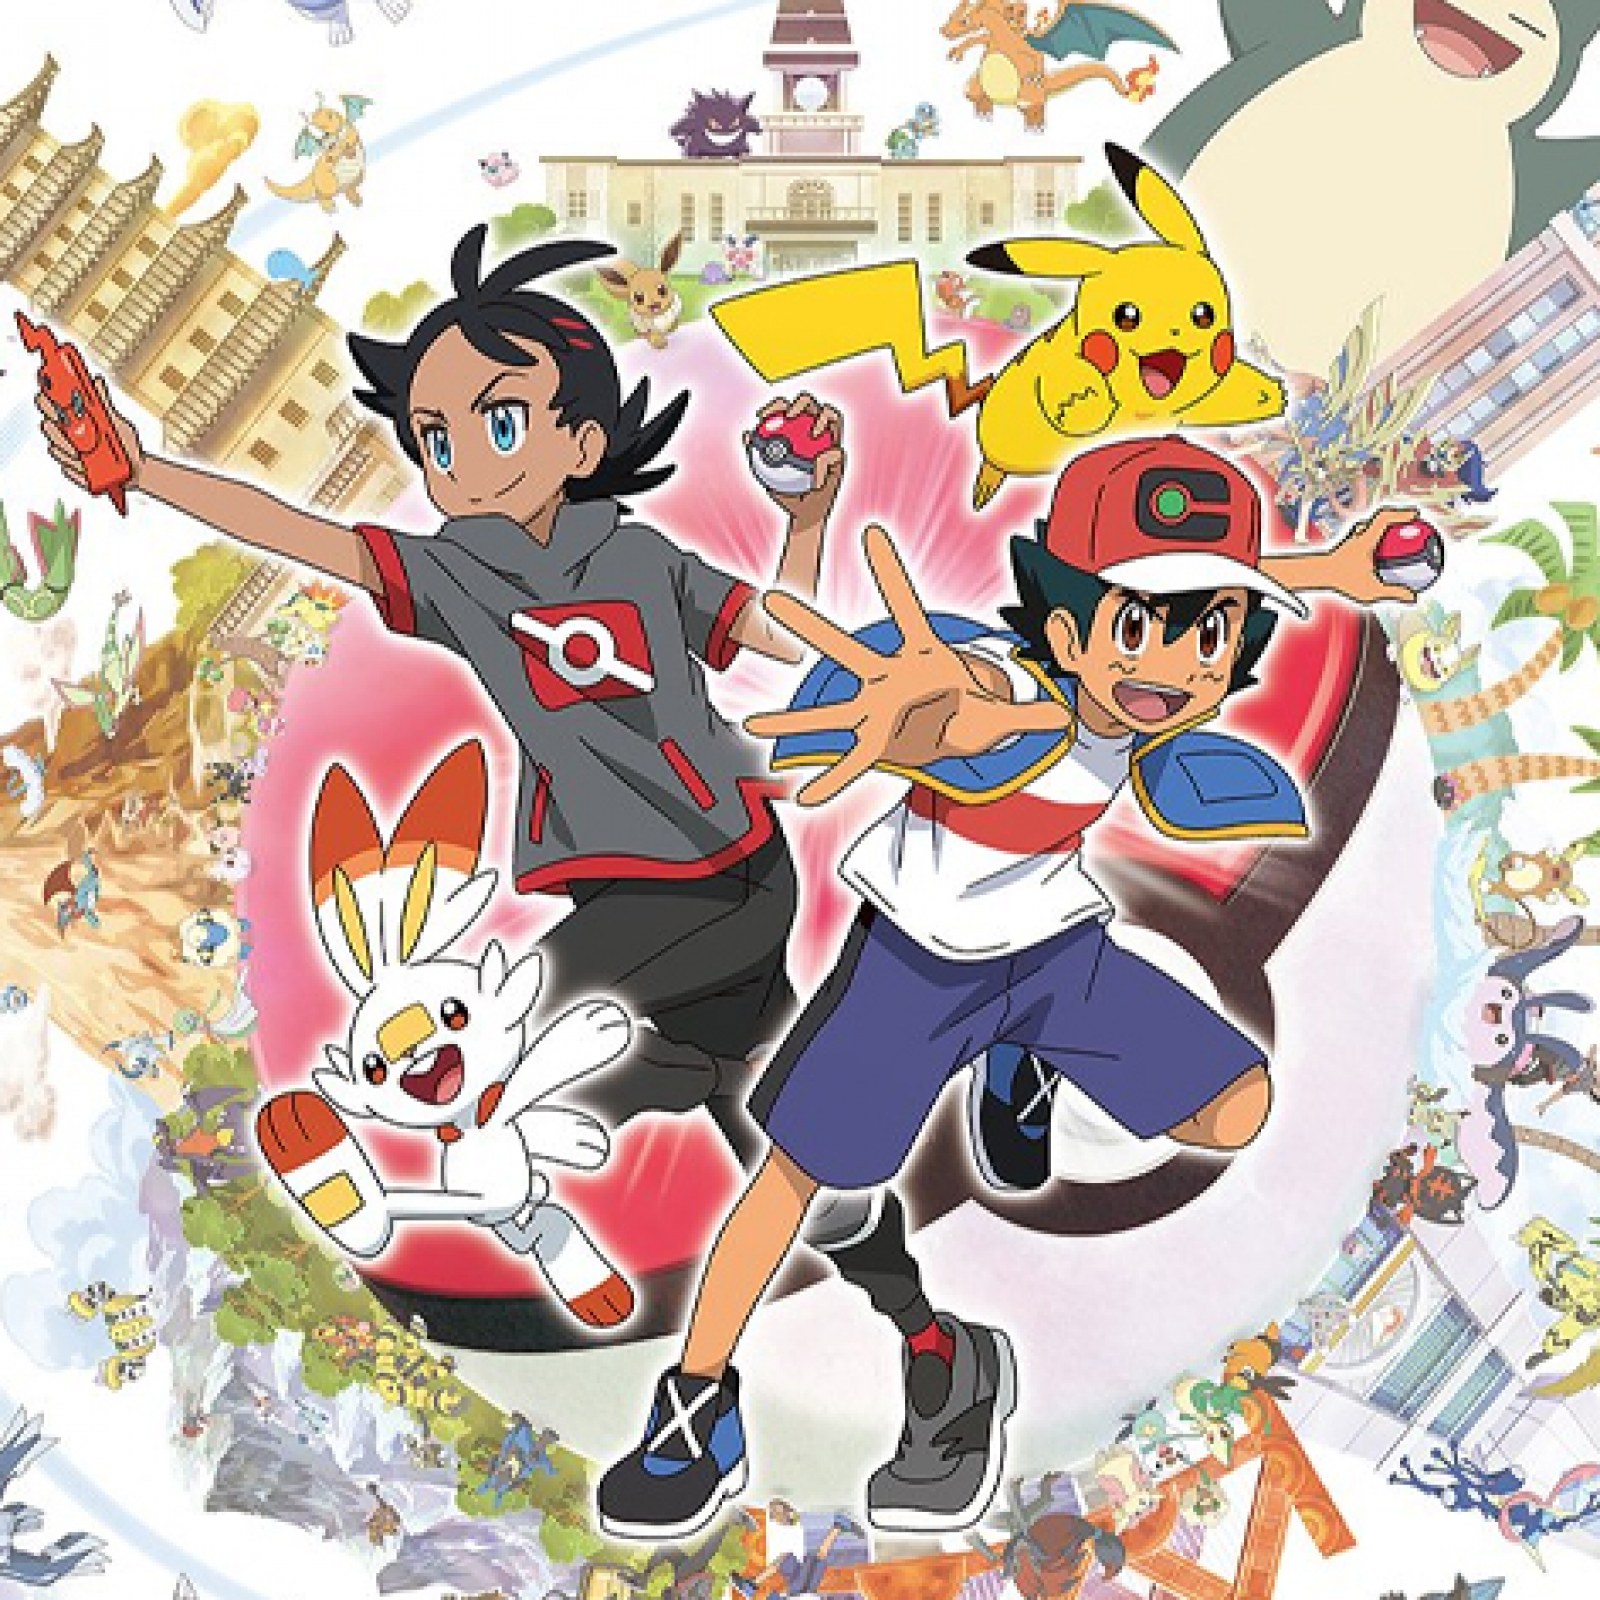 The Pokémon Anime Is Going To Galar For A Sword & Shield Arc